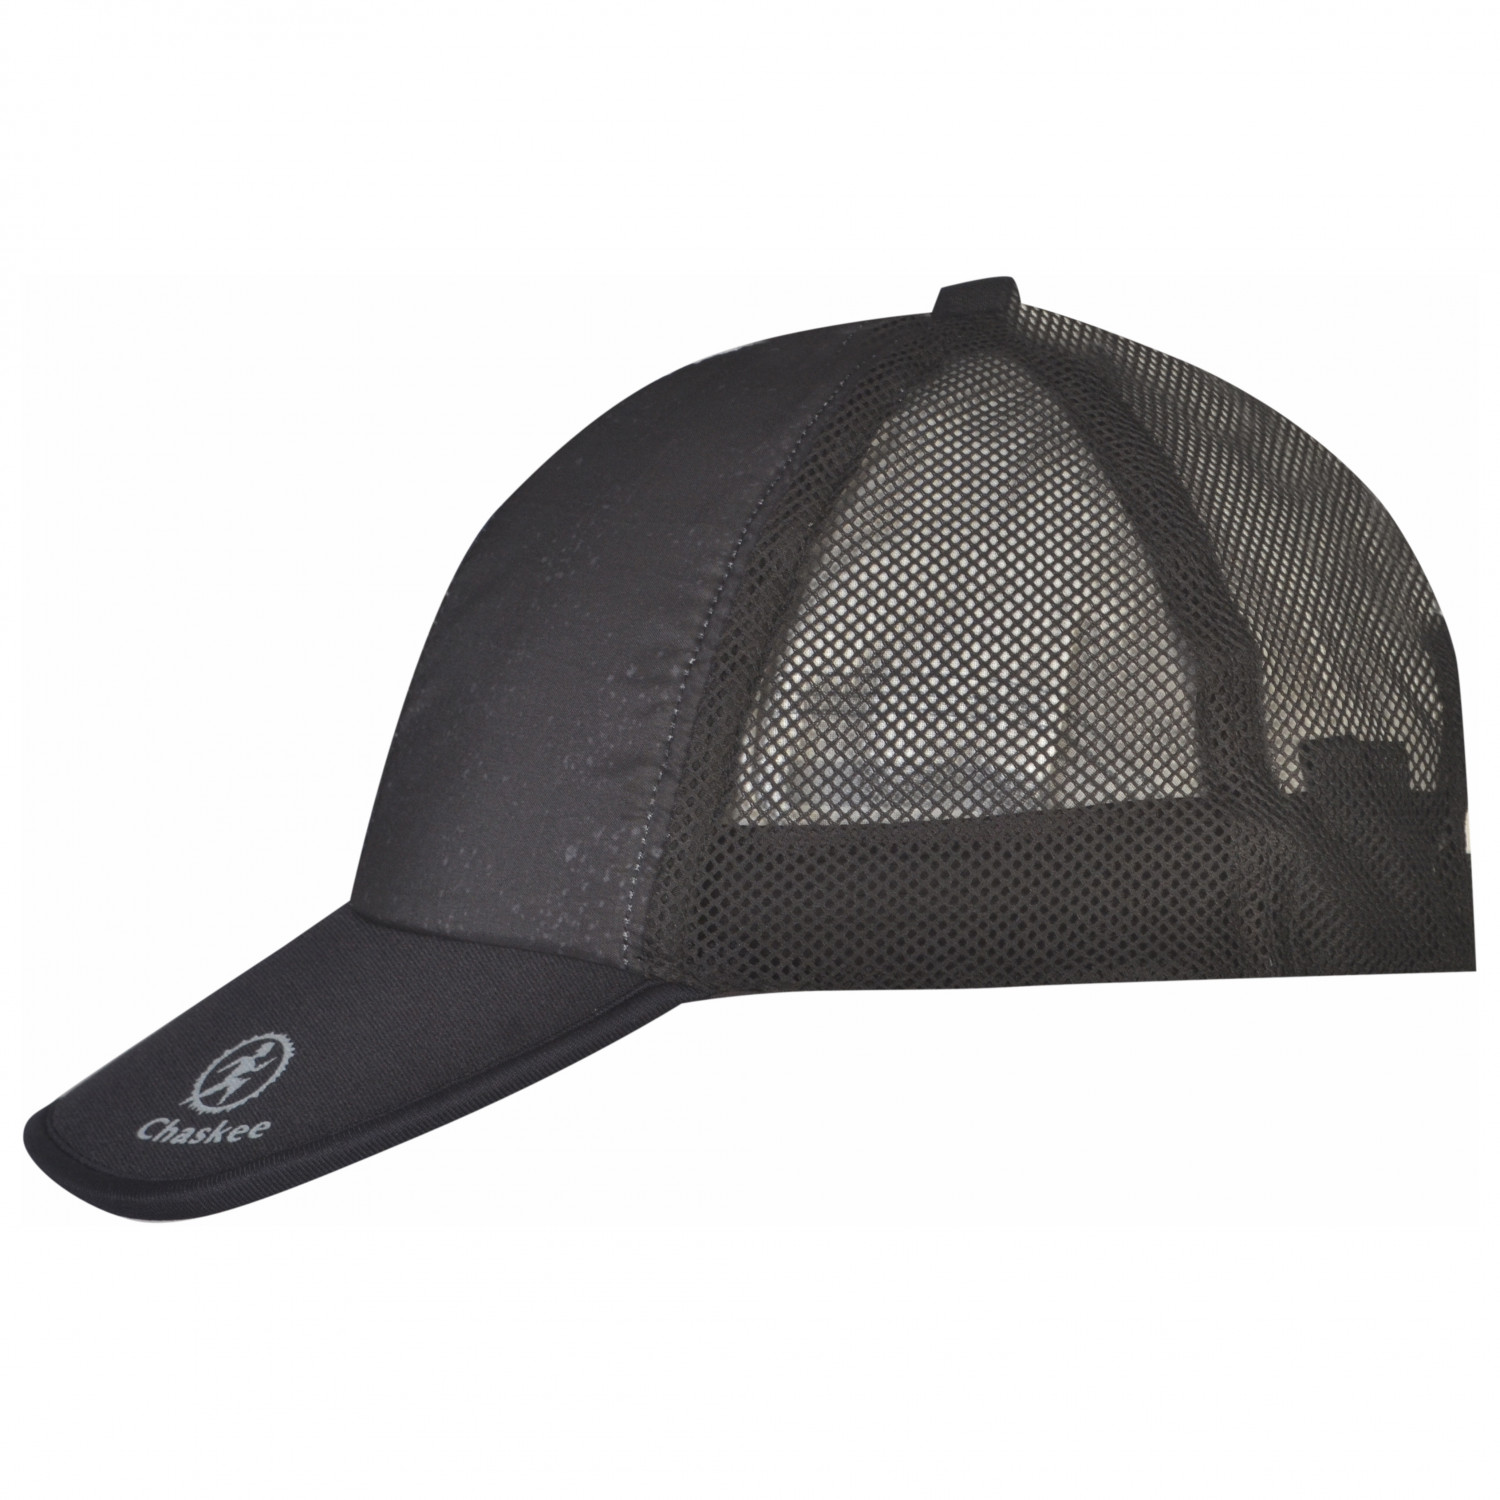 Кепка Chaskee Packable Trucker, цвет Stone 1/Black